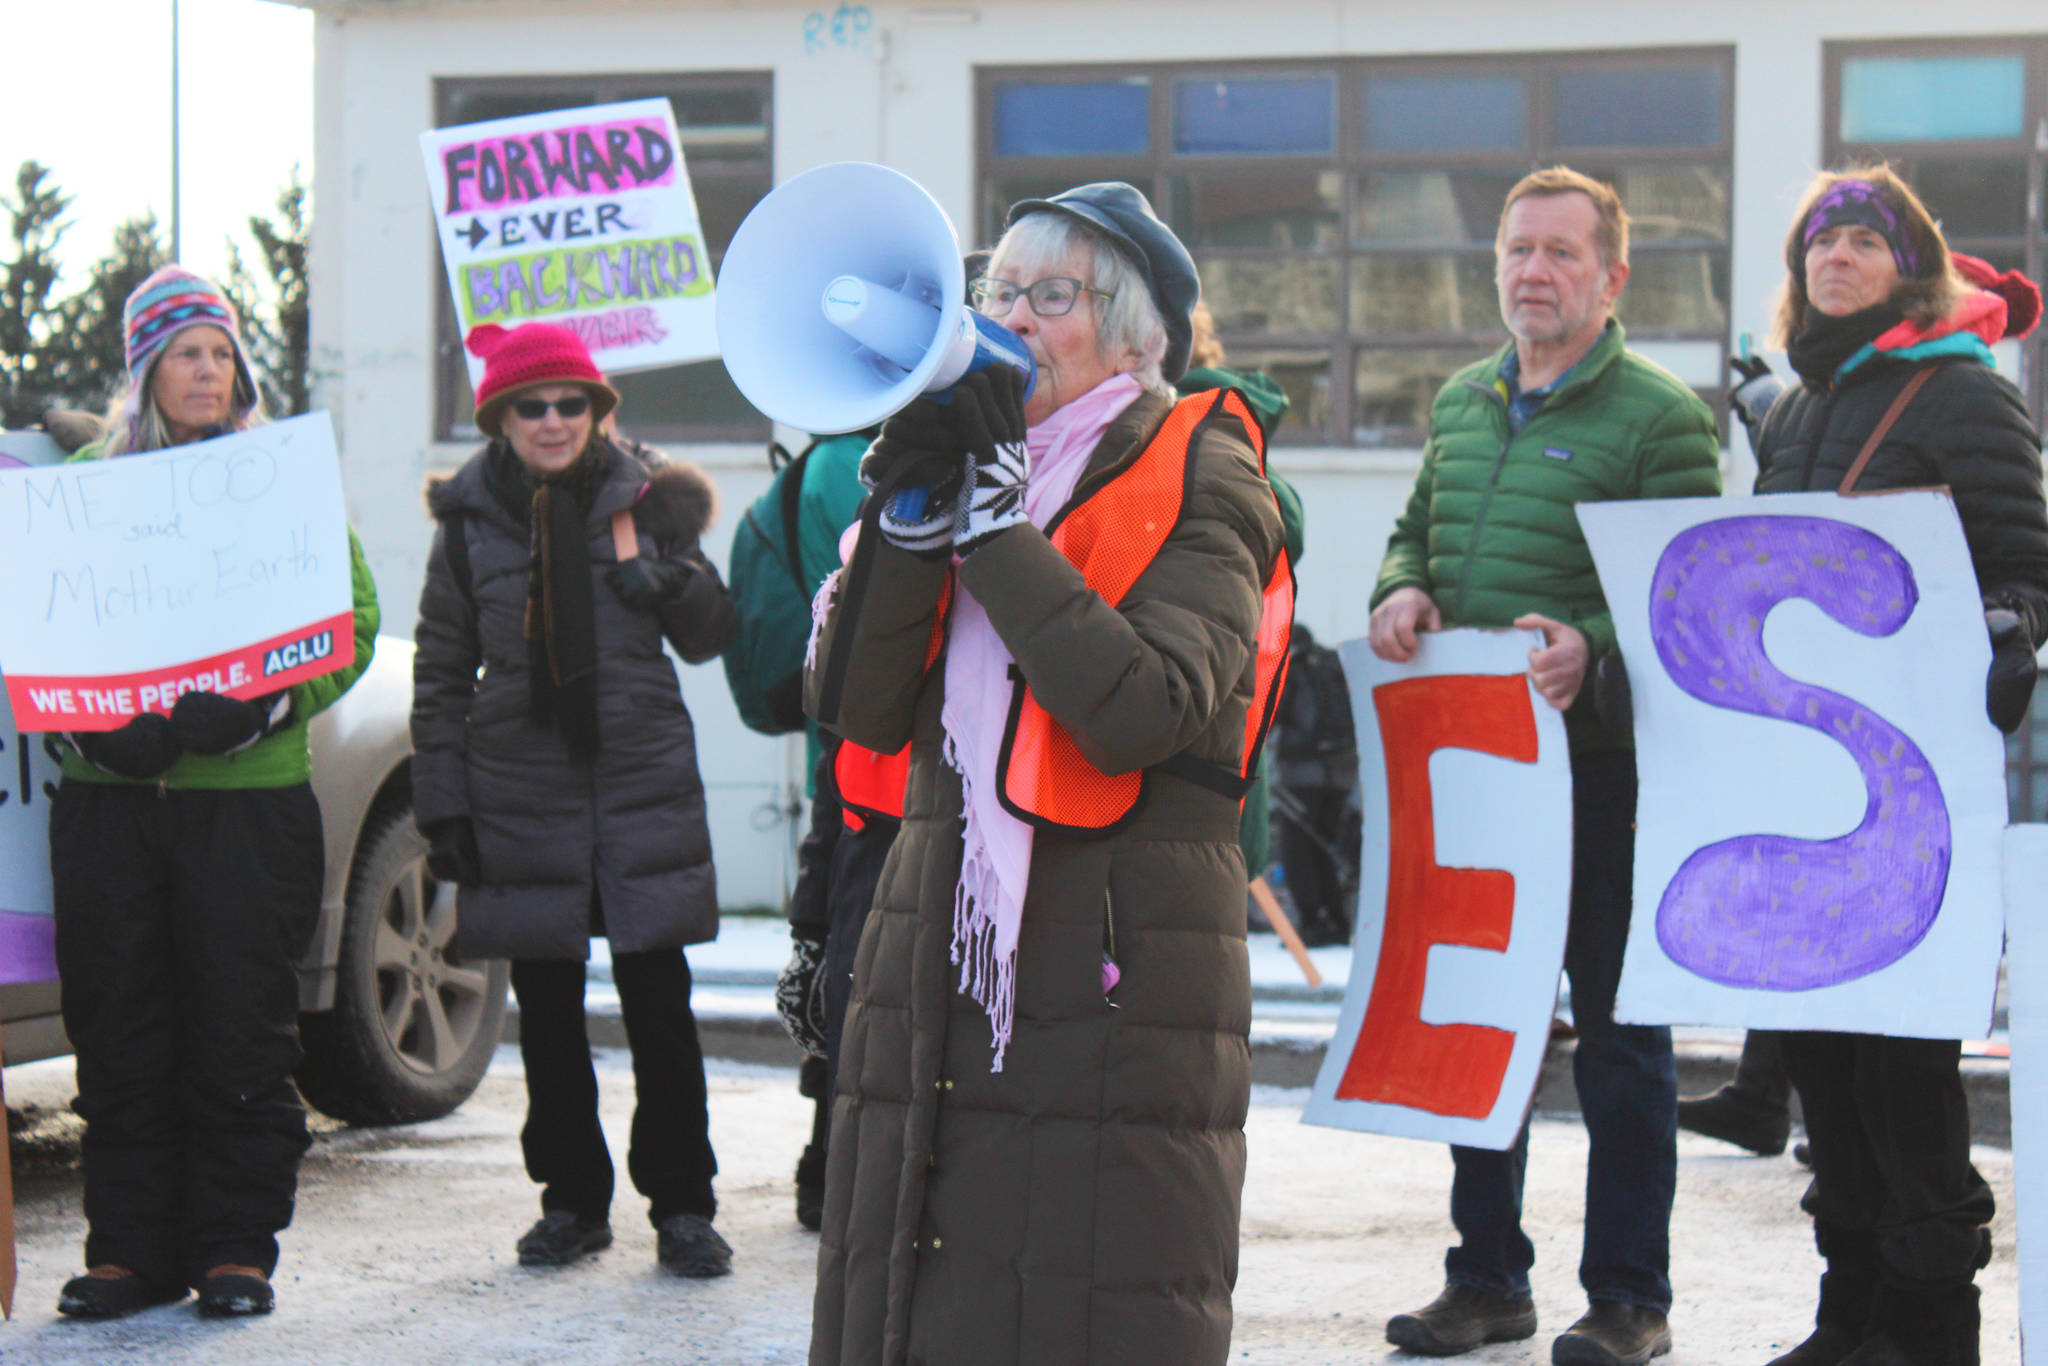 Sandy Garity, coordinator of the Women’s March on Homer 2018, speaks to an assembled crowd of marchers shortly before they take off on their path through the town Saturday, Jan. 20, 2018 in Homer, Alaska. More than 600 men, women and children turned out to this year’s march, which organizers said was focused on women’s rights as human rights, and voter registration. (Photo by Megan Pacer/Homer News)